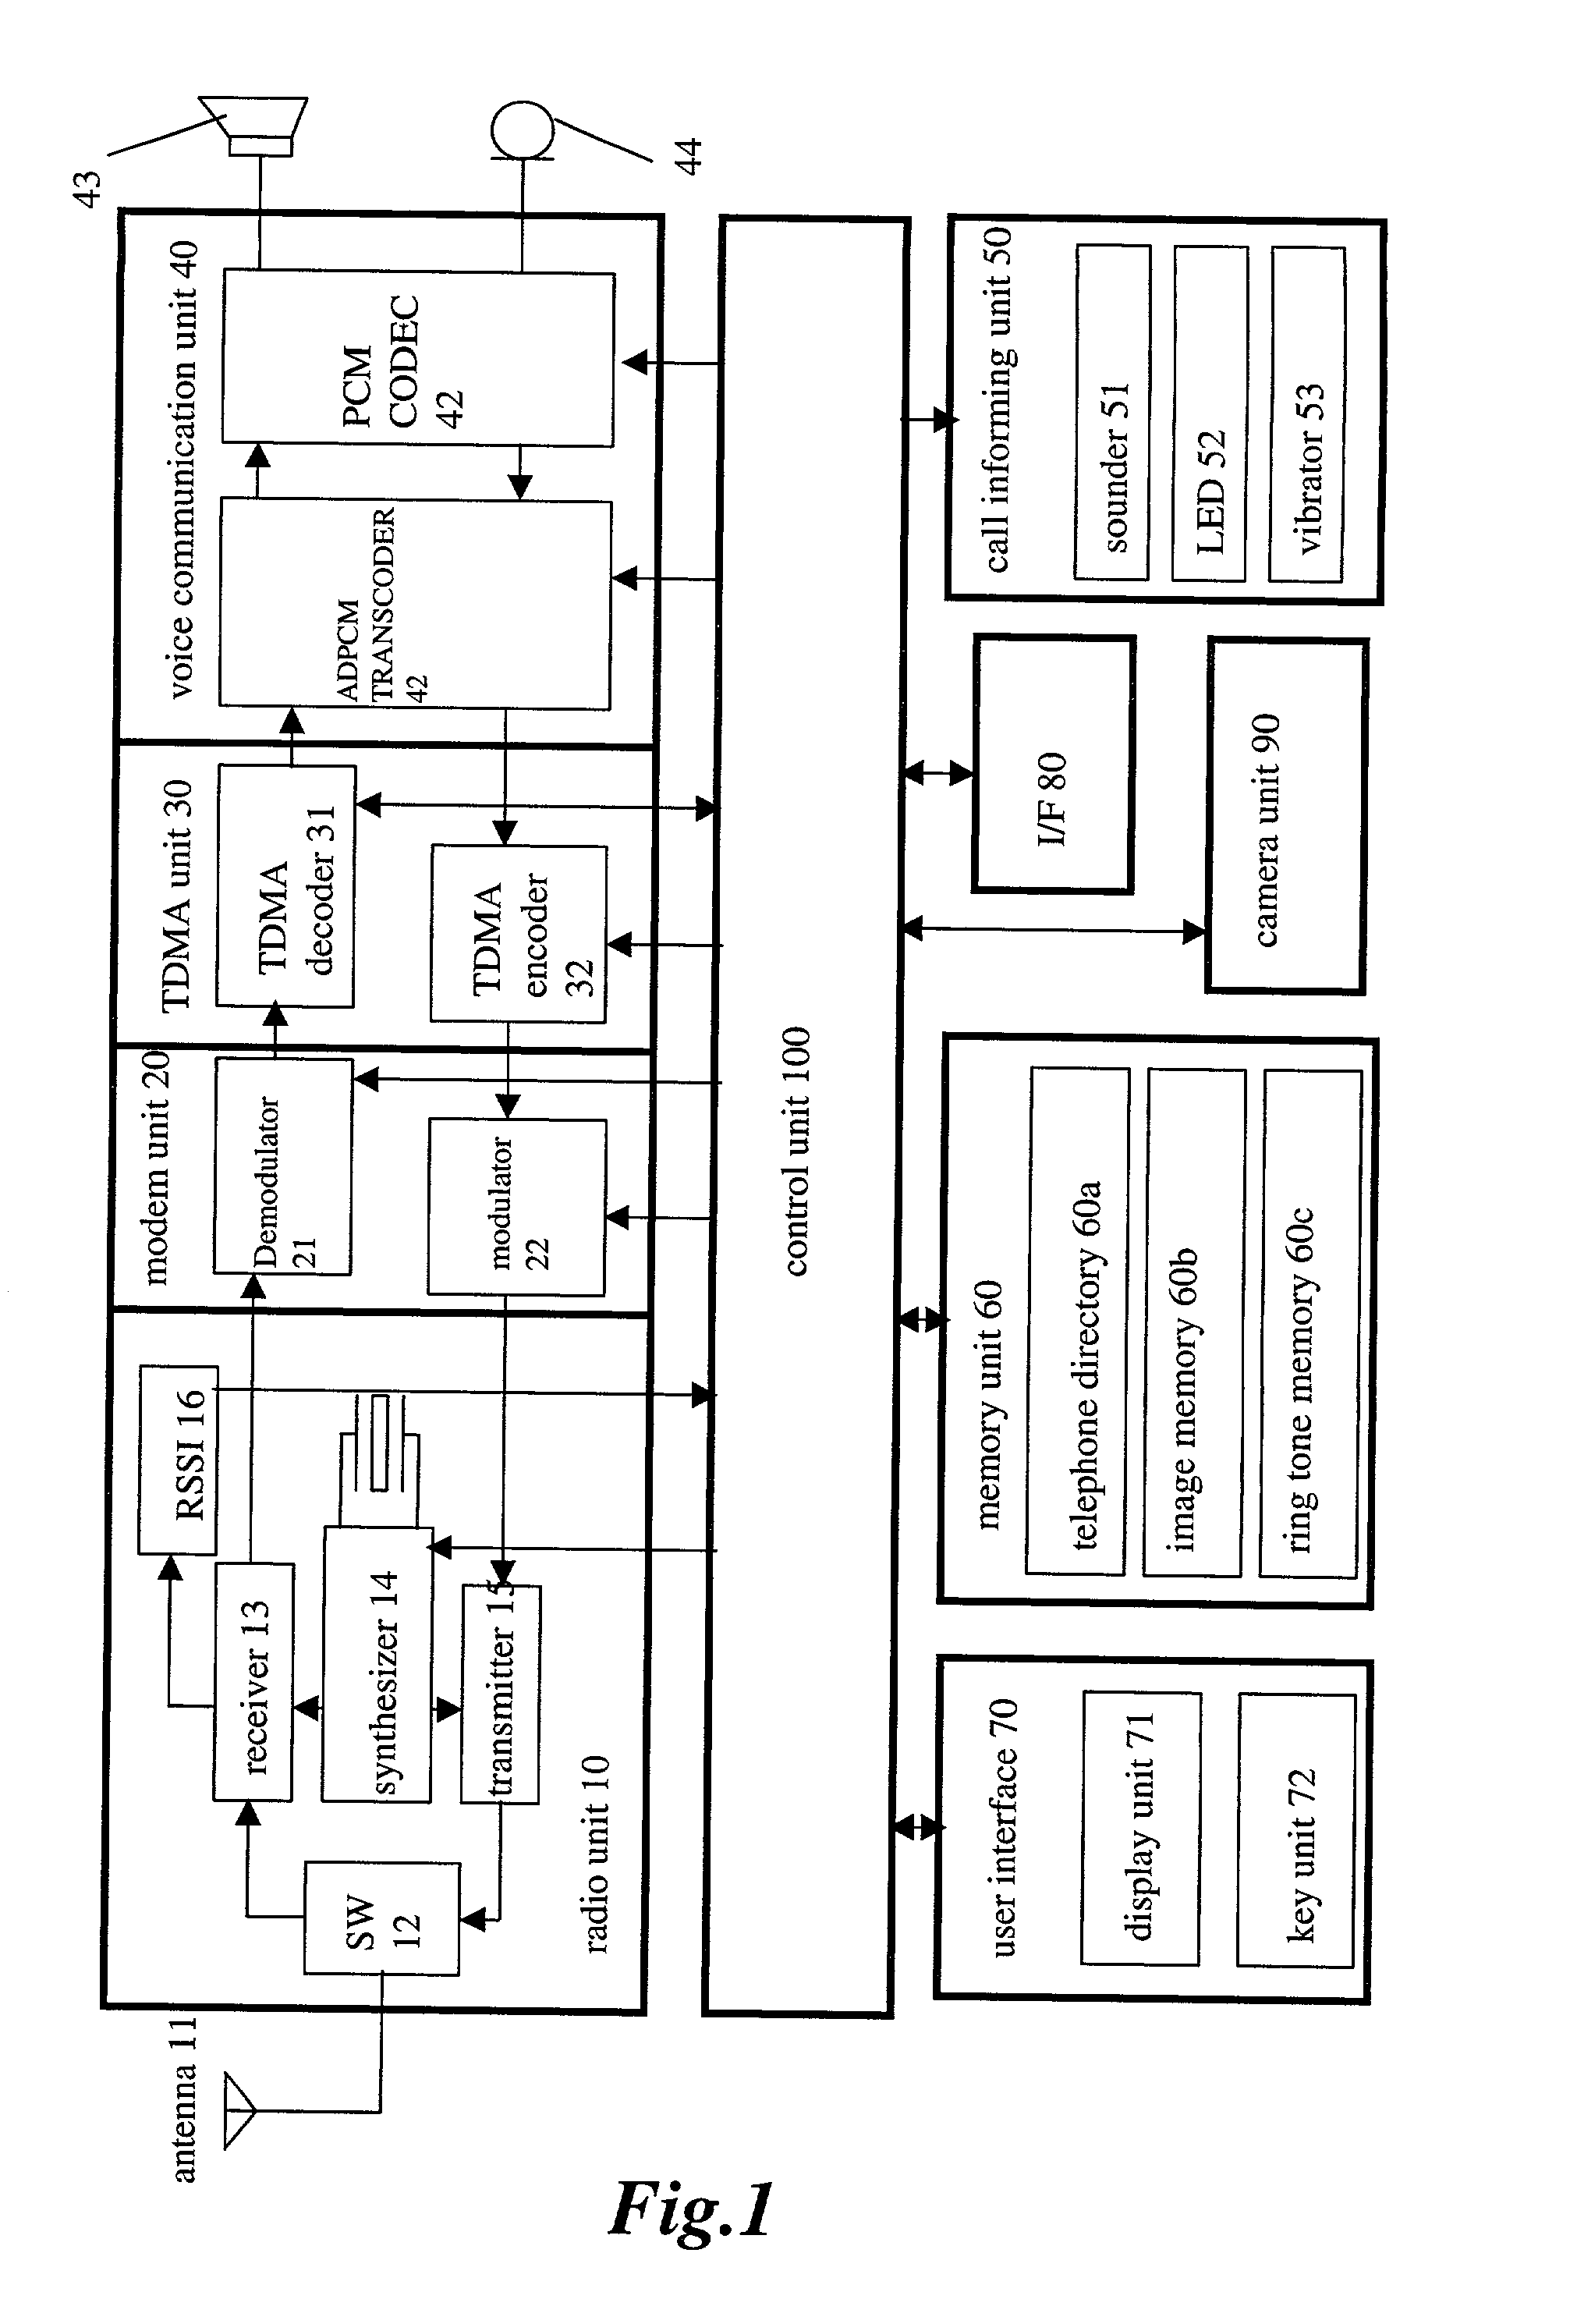 Communication apparatus for use in a communication system providing caller ID functionality